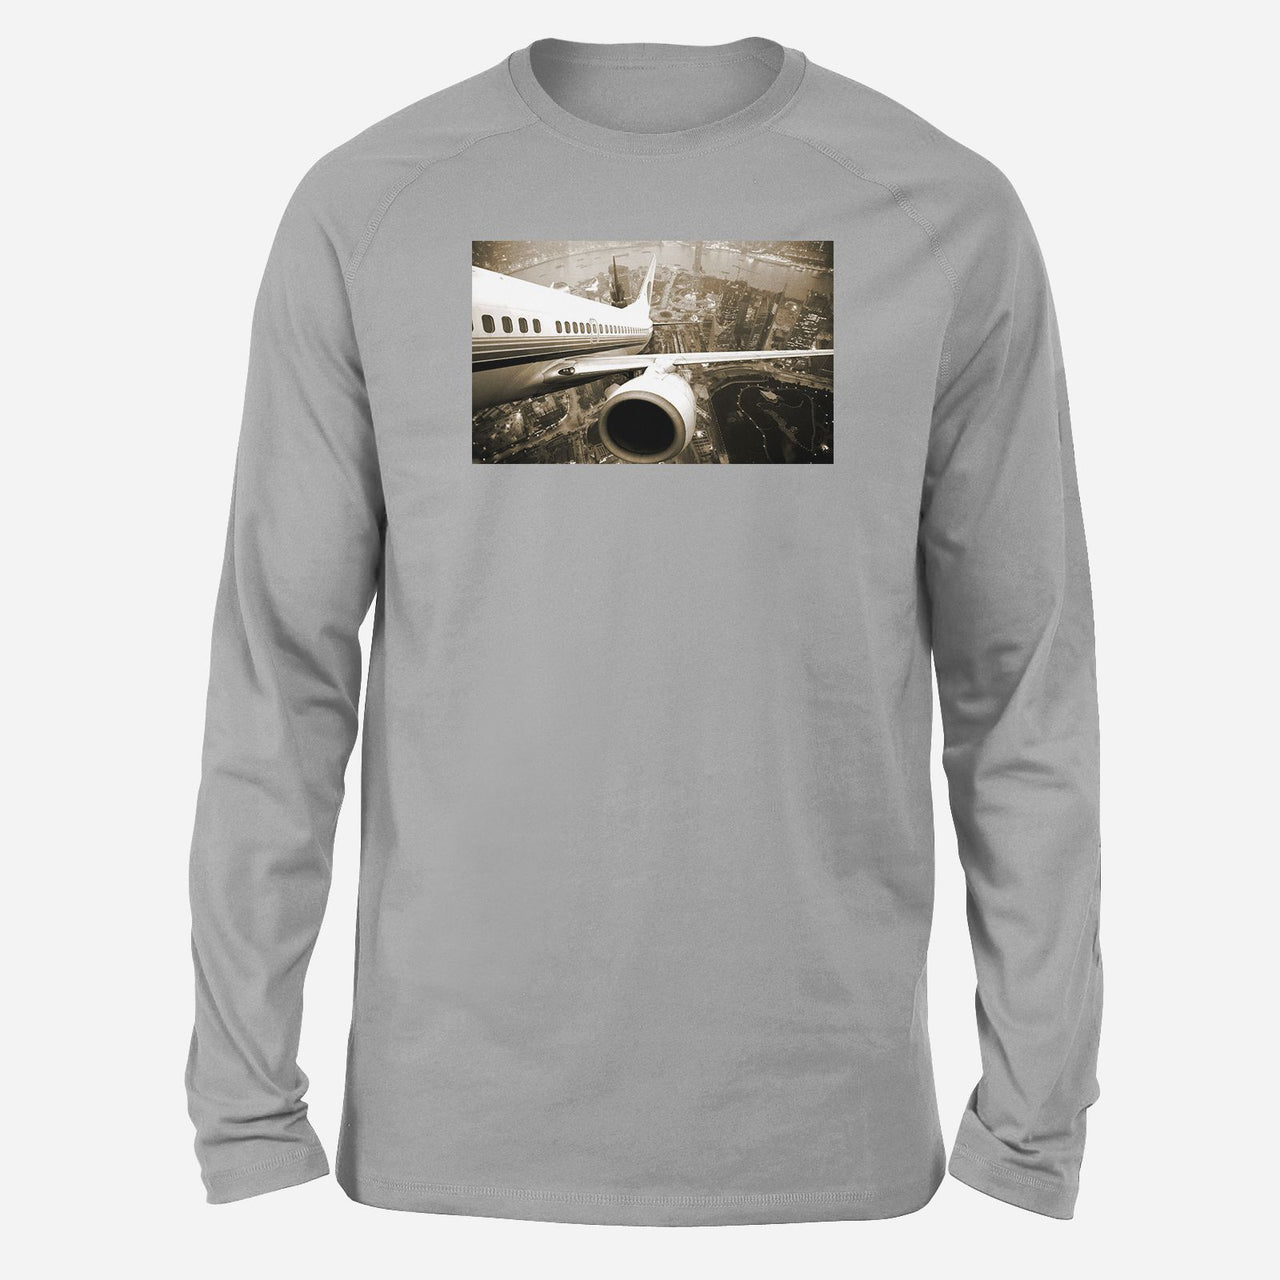 Departing Aircraft & City Scene behind Designed Long-Sleeve T-Shirts